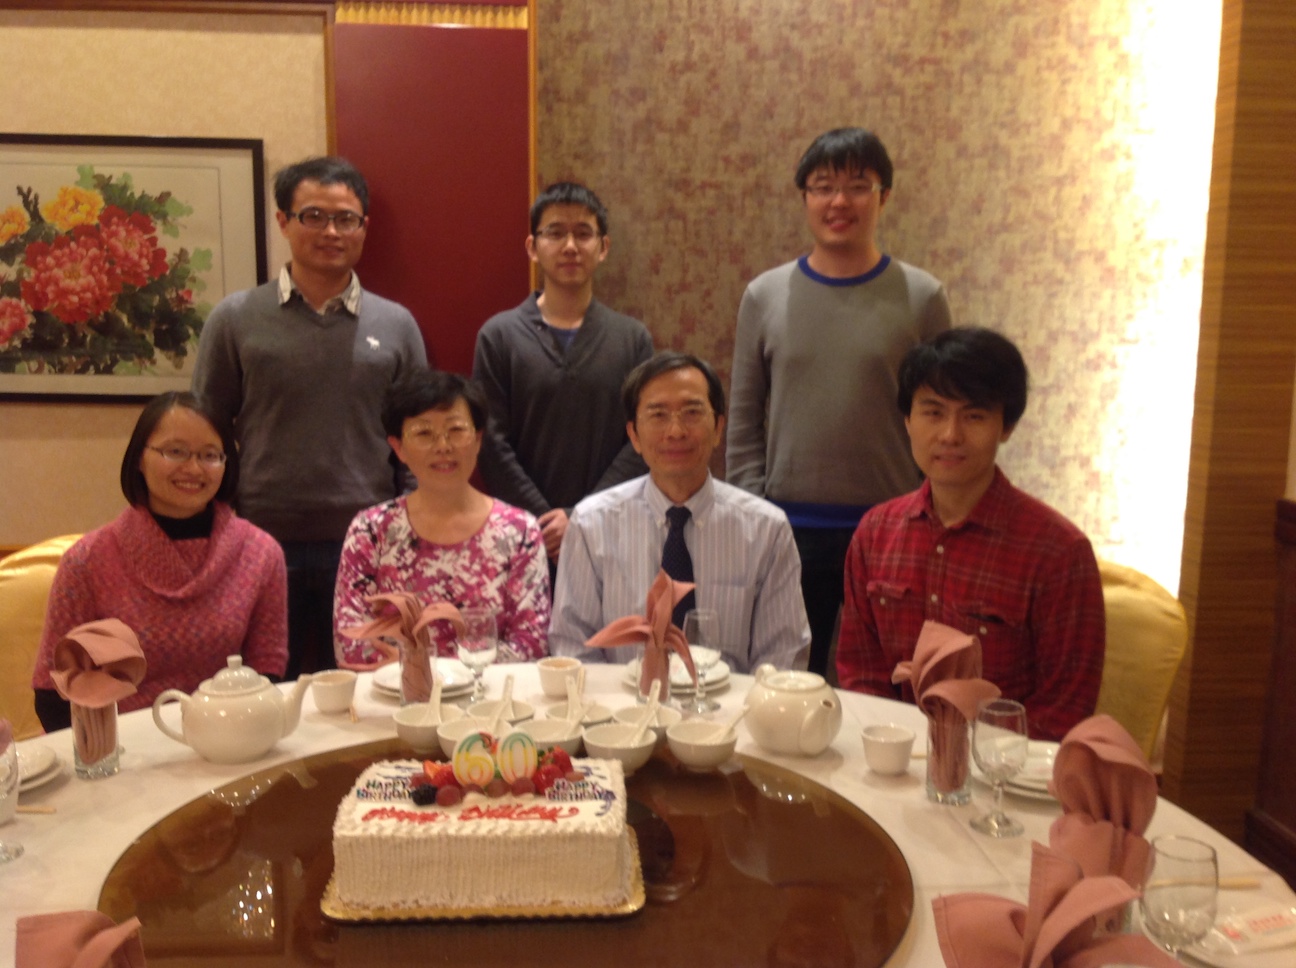 Dr. Wang's birthday lunch with students